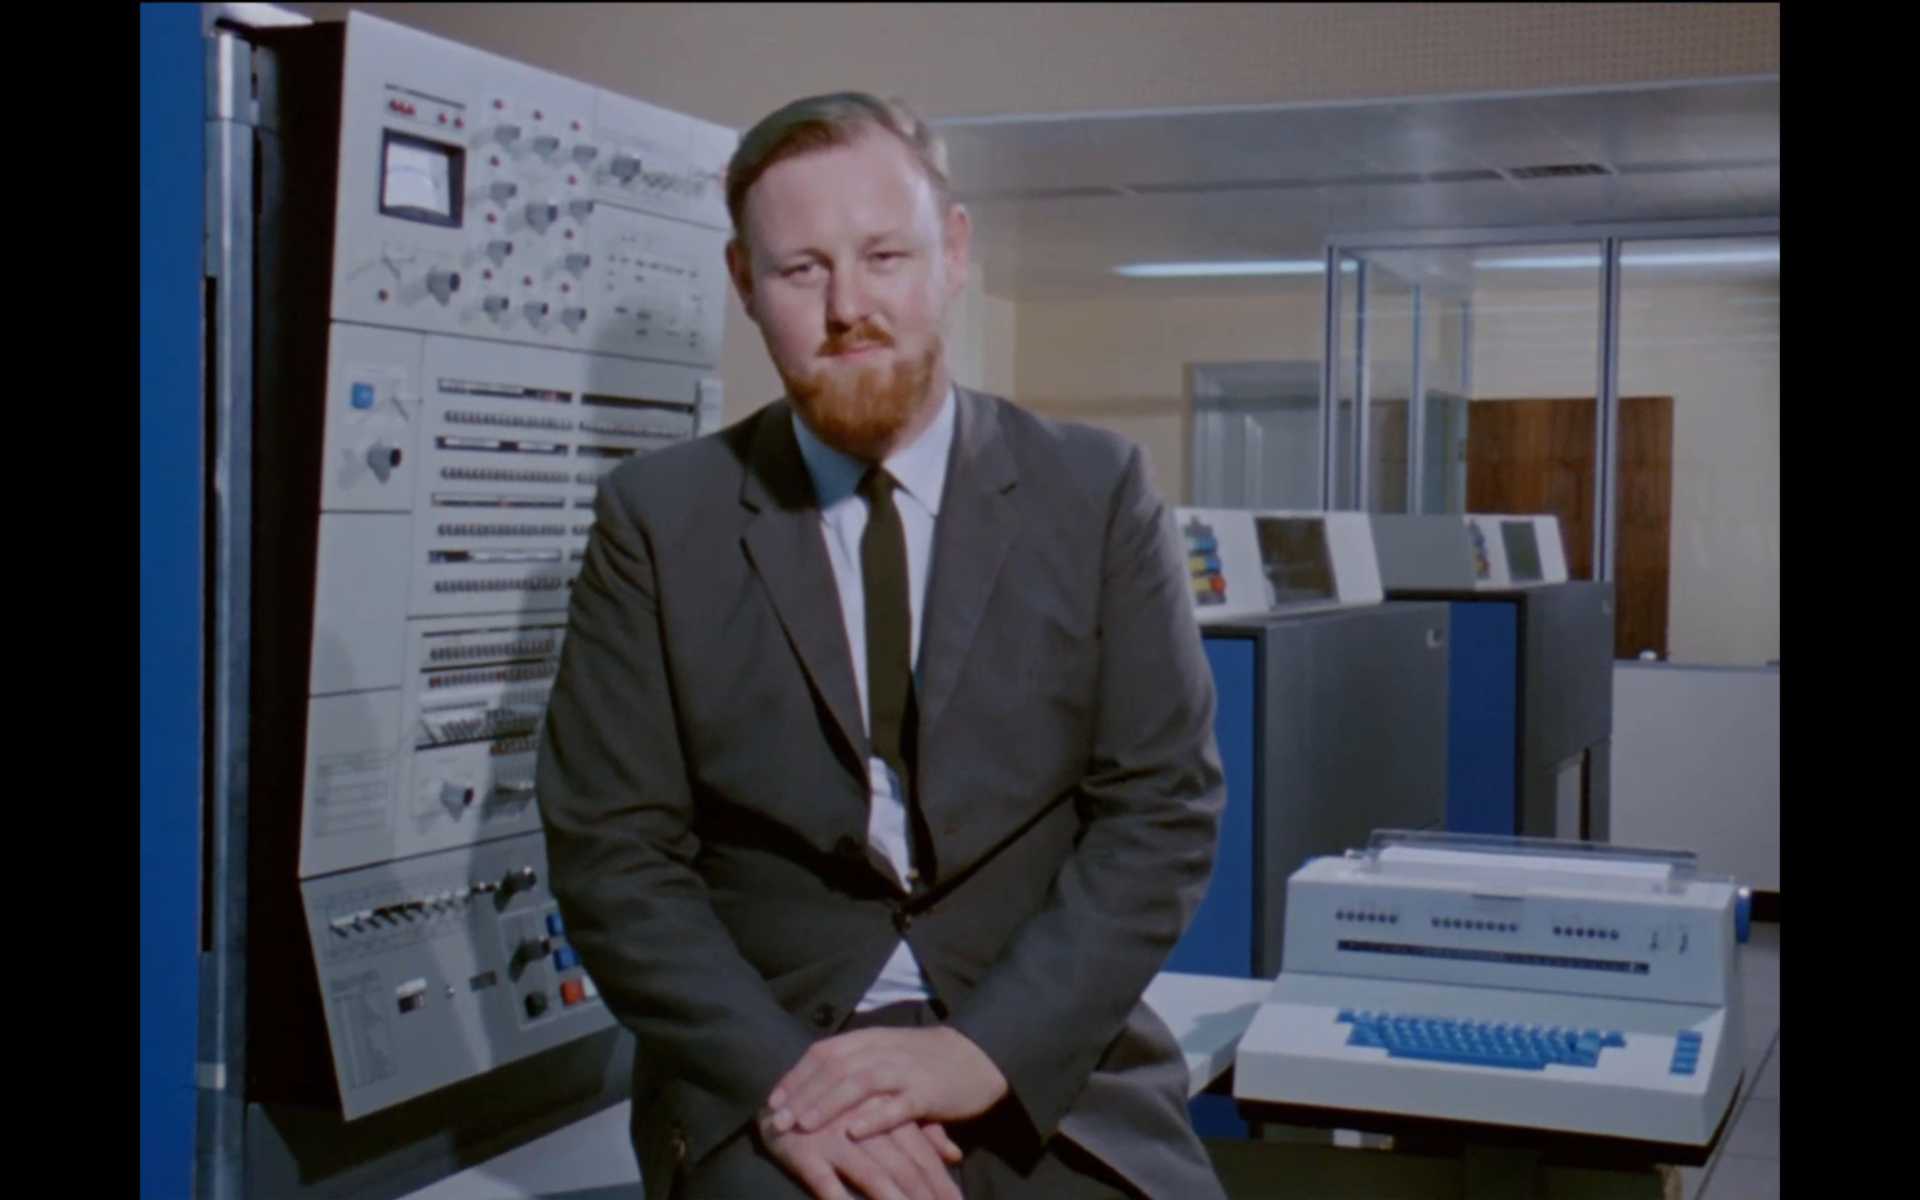 Roger Tomlinson talks about the use of computers for the Canada Land Inventory in 1967. Frame from "Data for Decision", a National Film Board of Canada documentary, directed by Michael Millar.